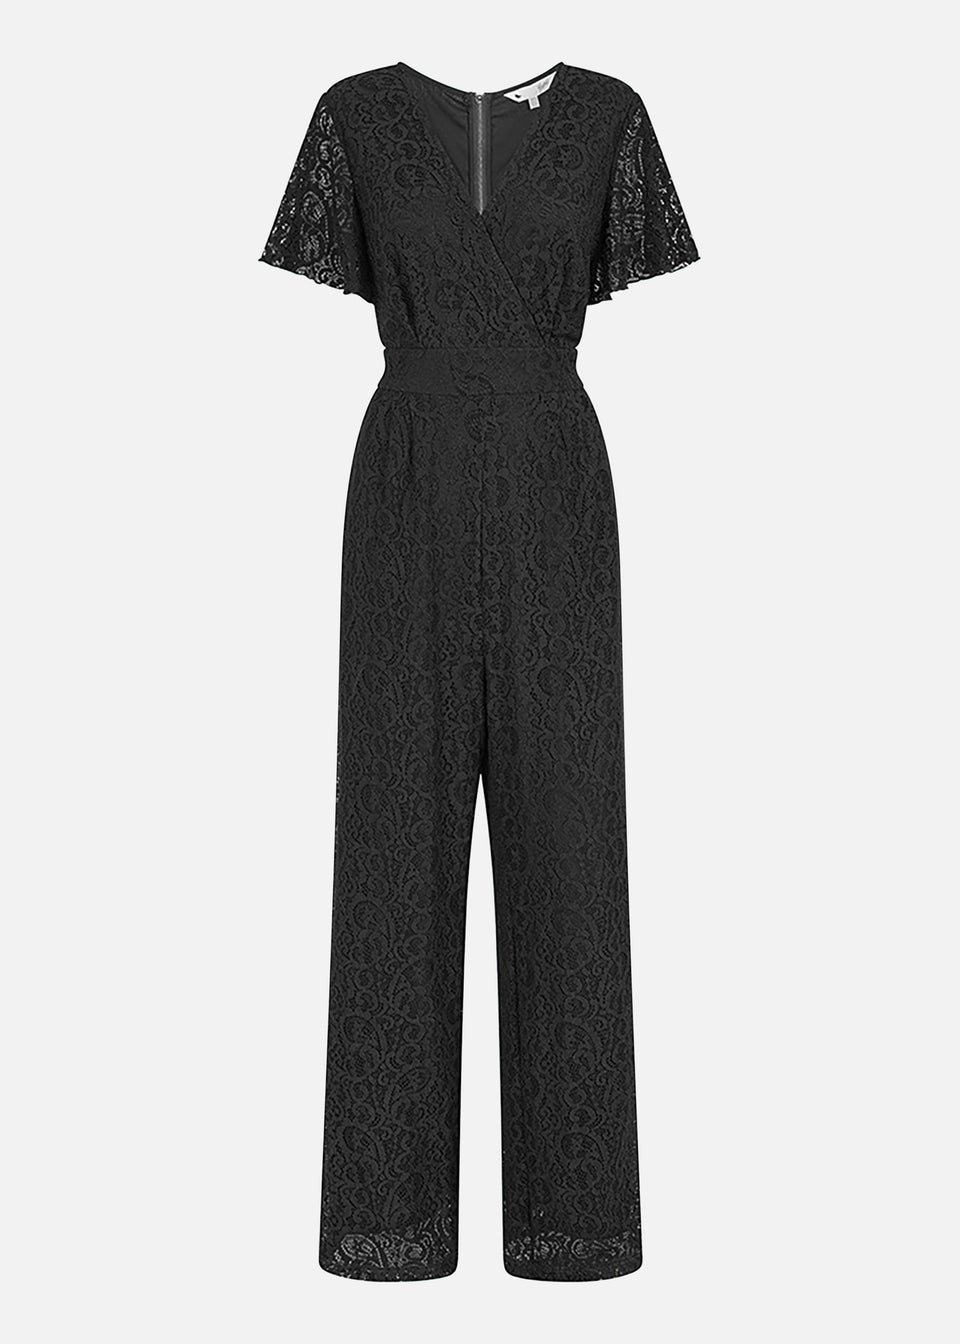 Yumi Black Angel Sleeve Lace Jumpsuit With Pockets